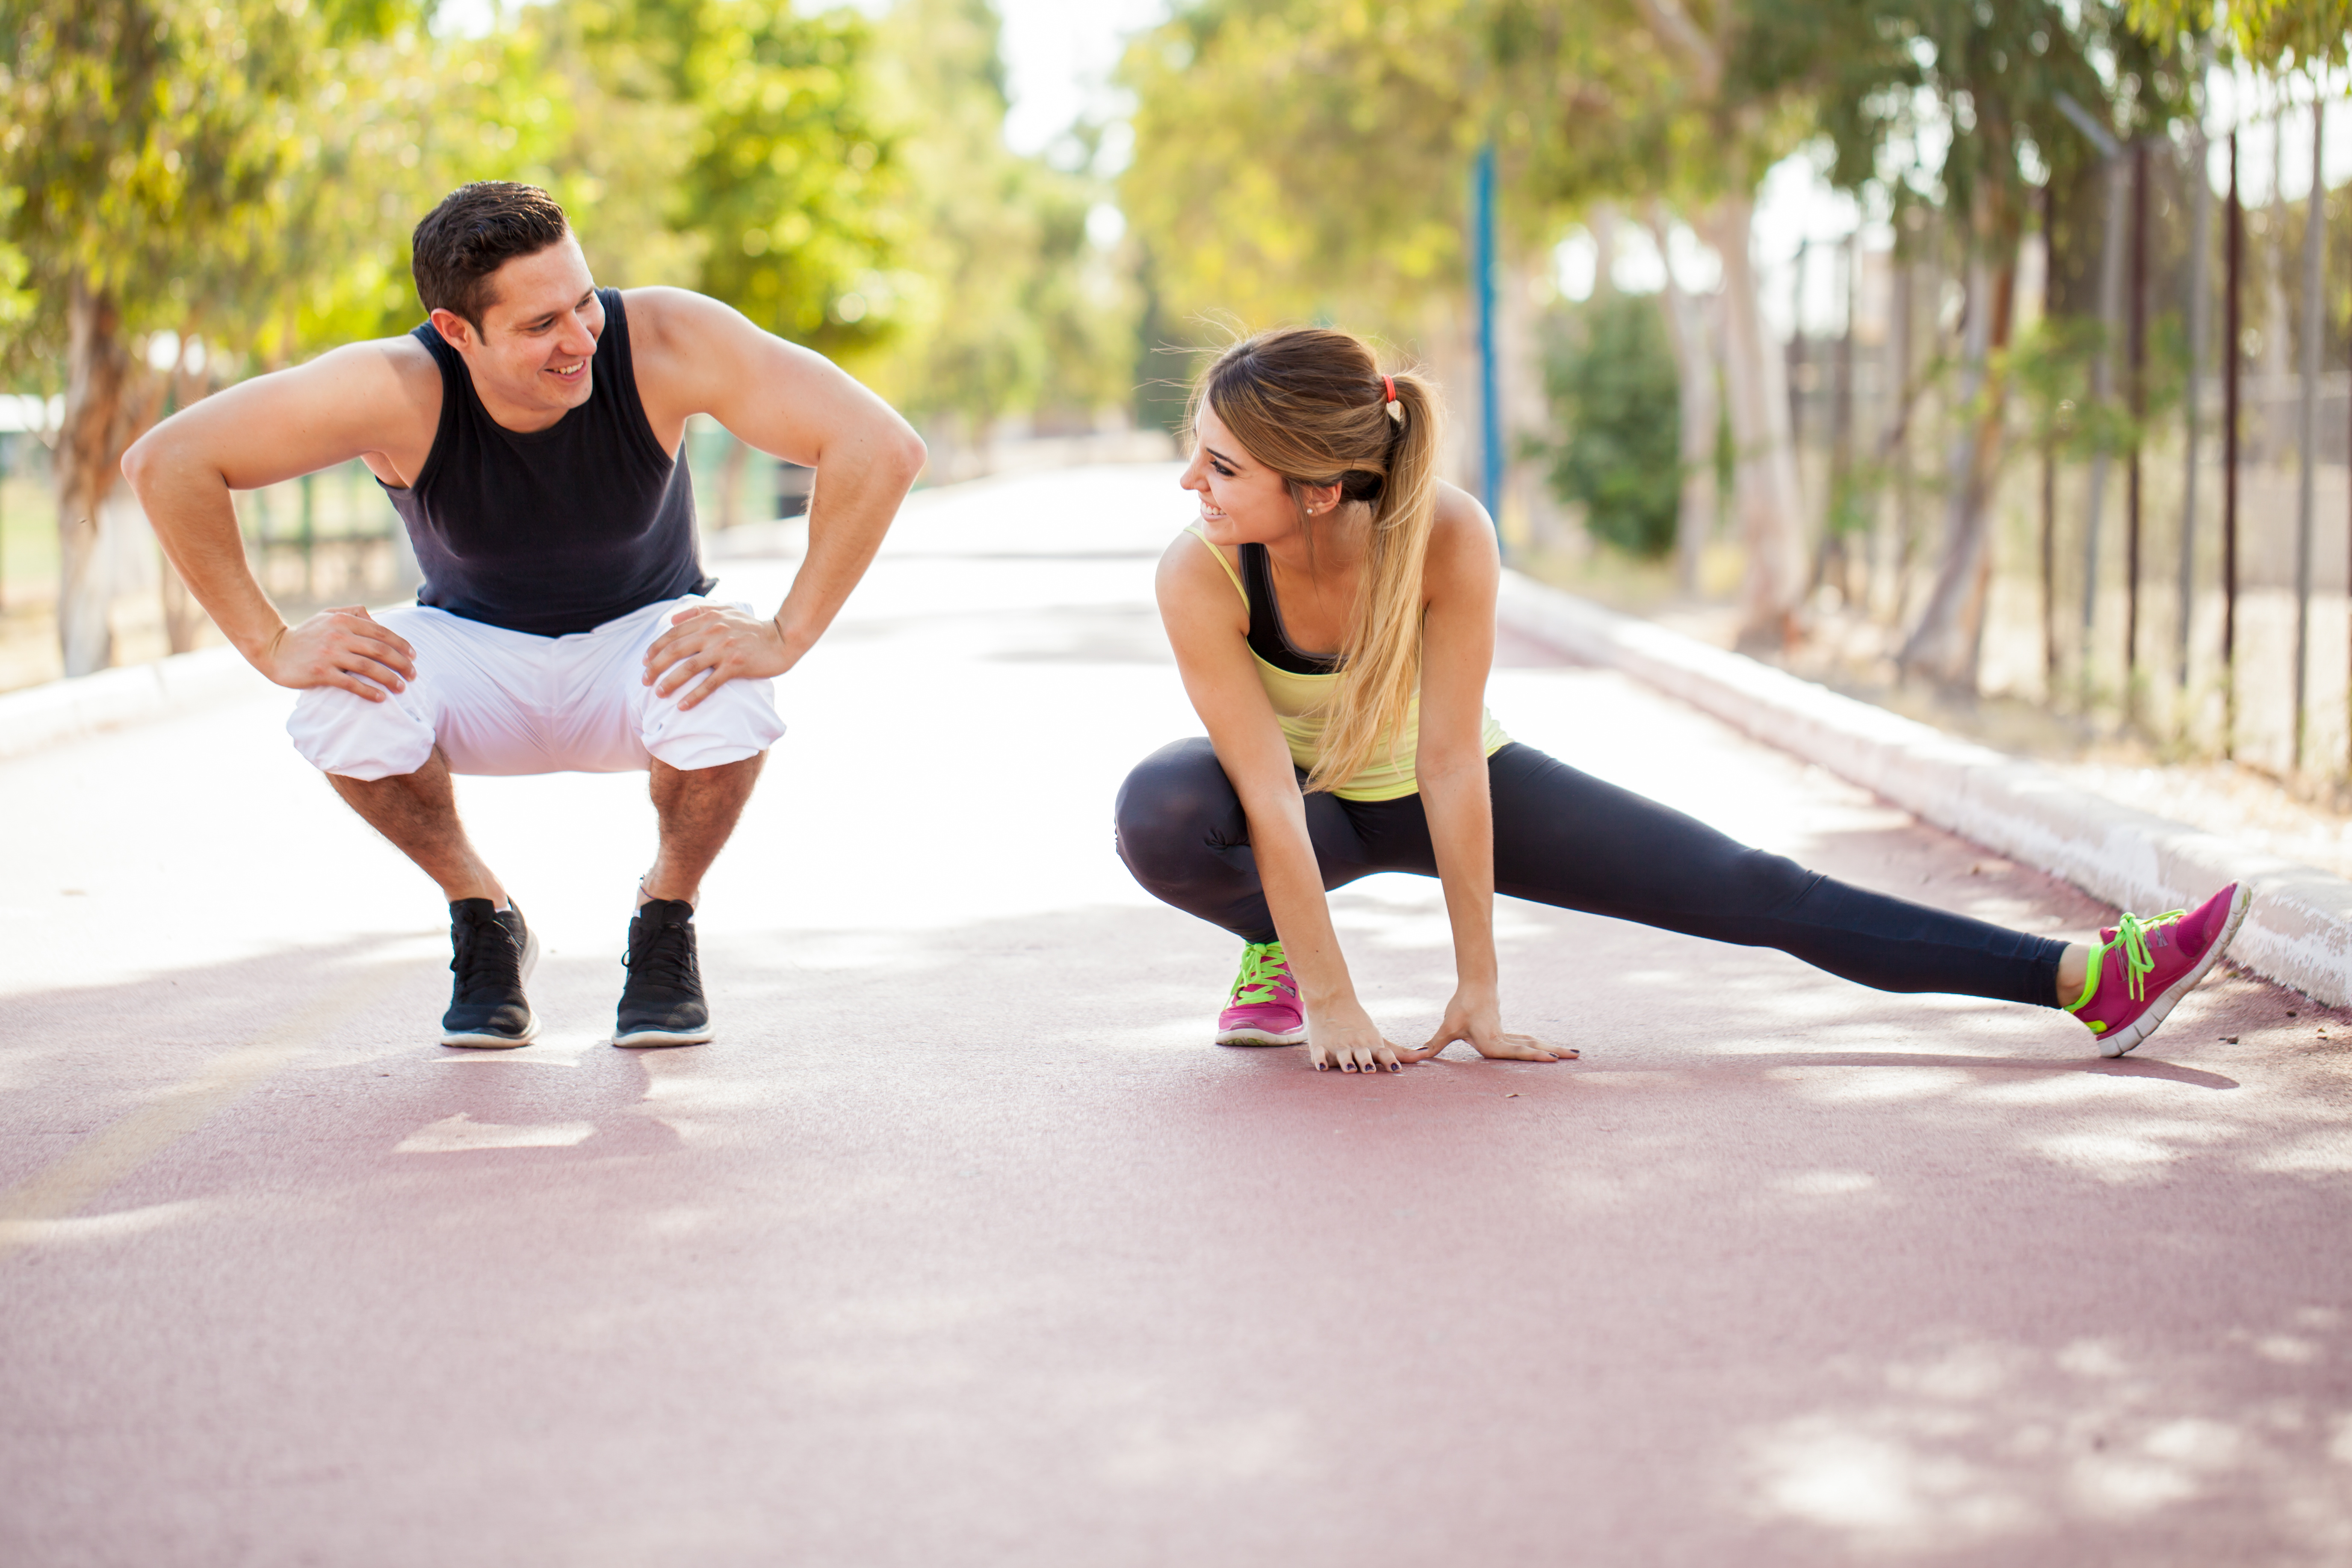 The 5 Reasons Why You Should Workout Together